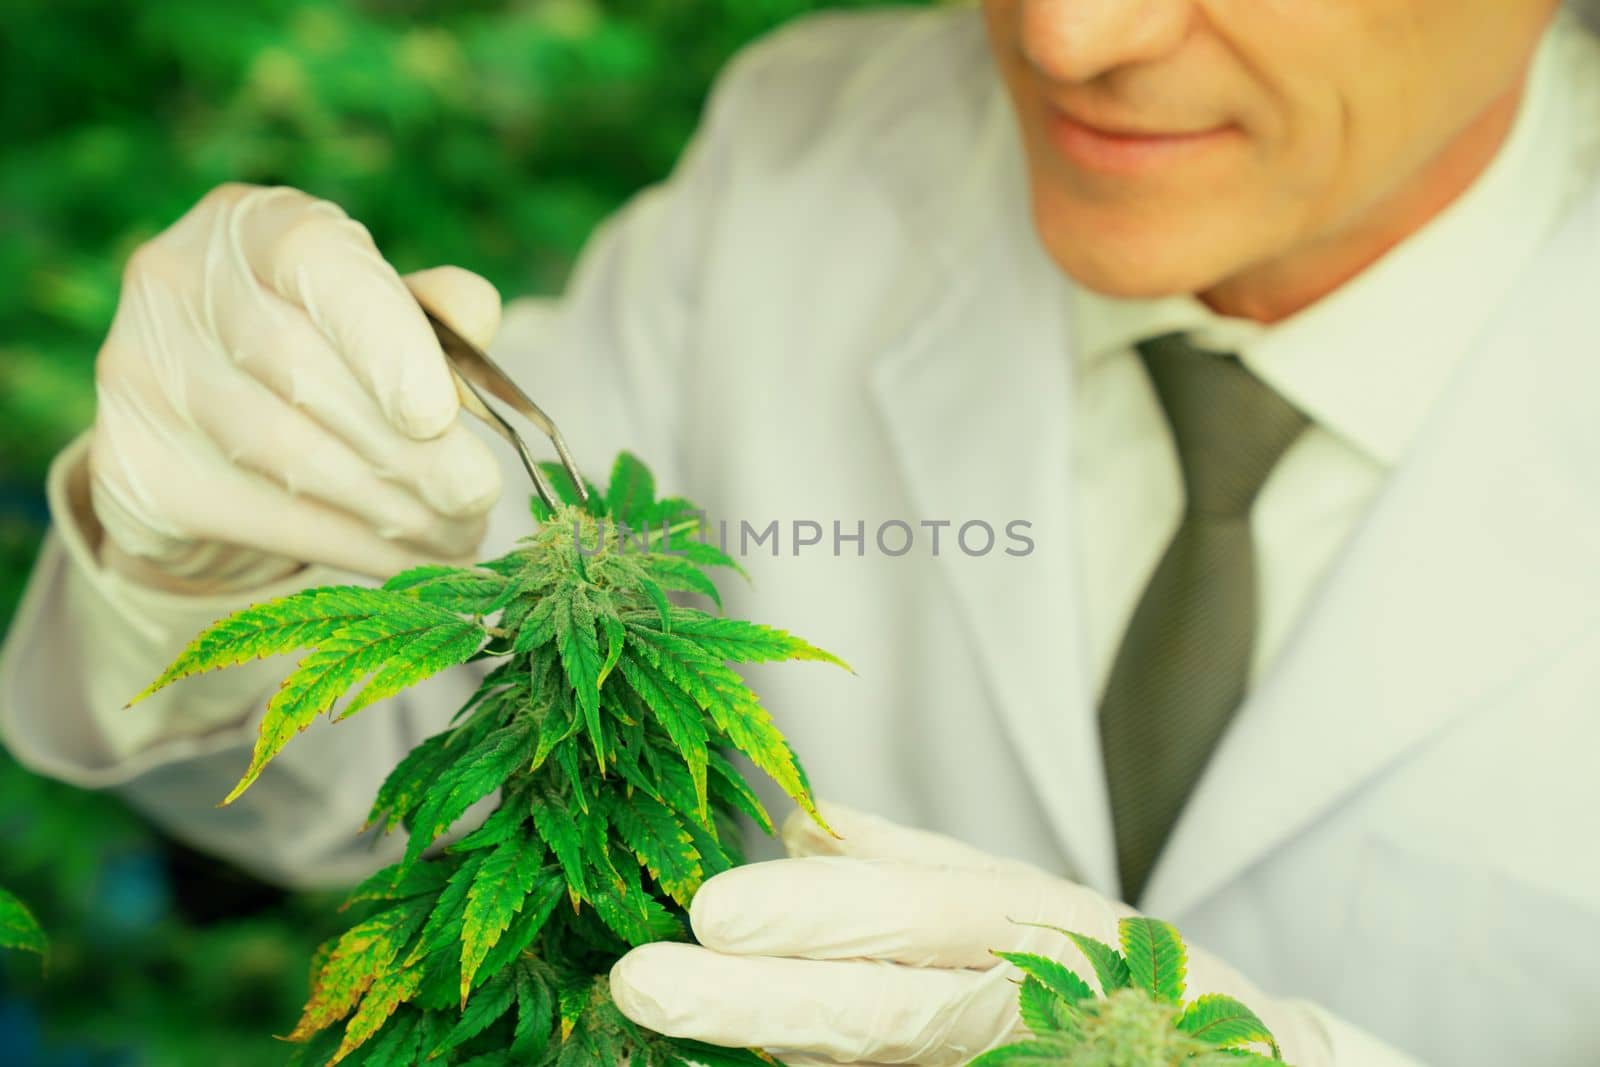 Gratifying male scientist using tweezers remove bud from cannabis hemp plant in grow facility. Cannabis hemp farm indoor for high quality medicinal cannabis product for medical usage and health care.